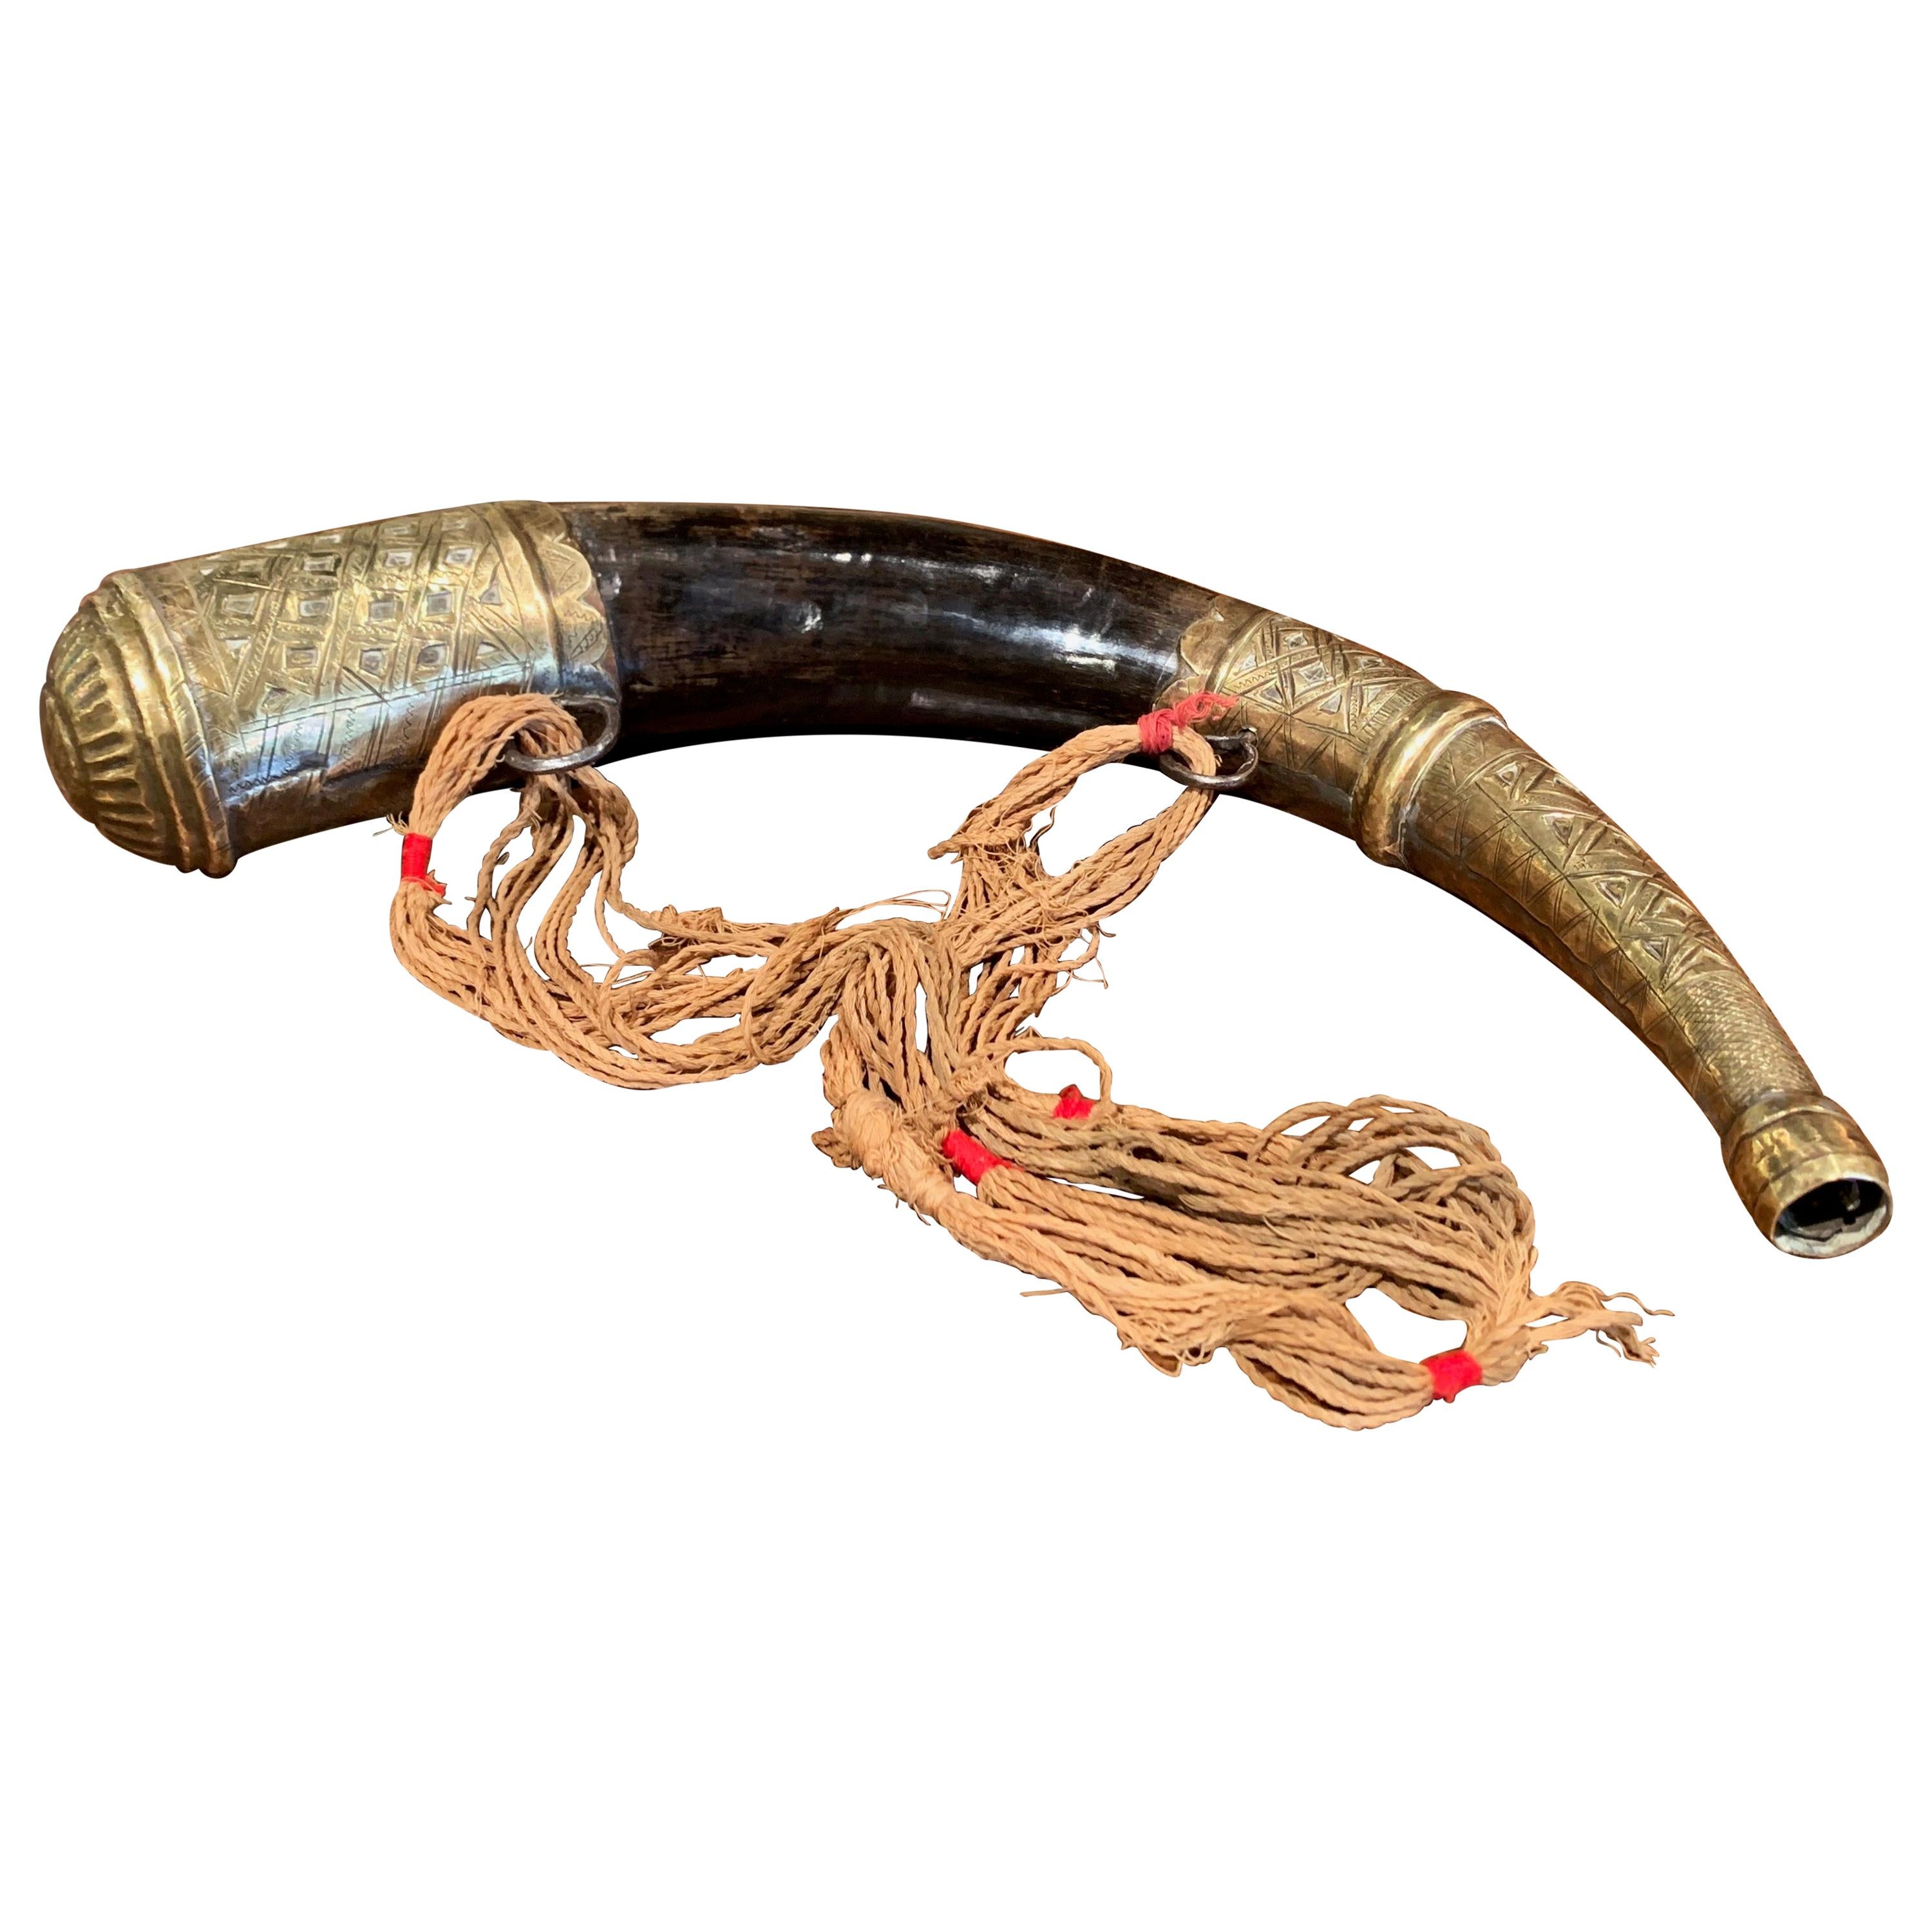 19th Century French Drinking Horn with Copper Embellishments